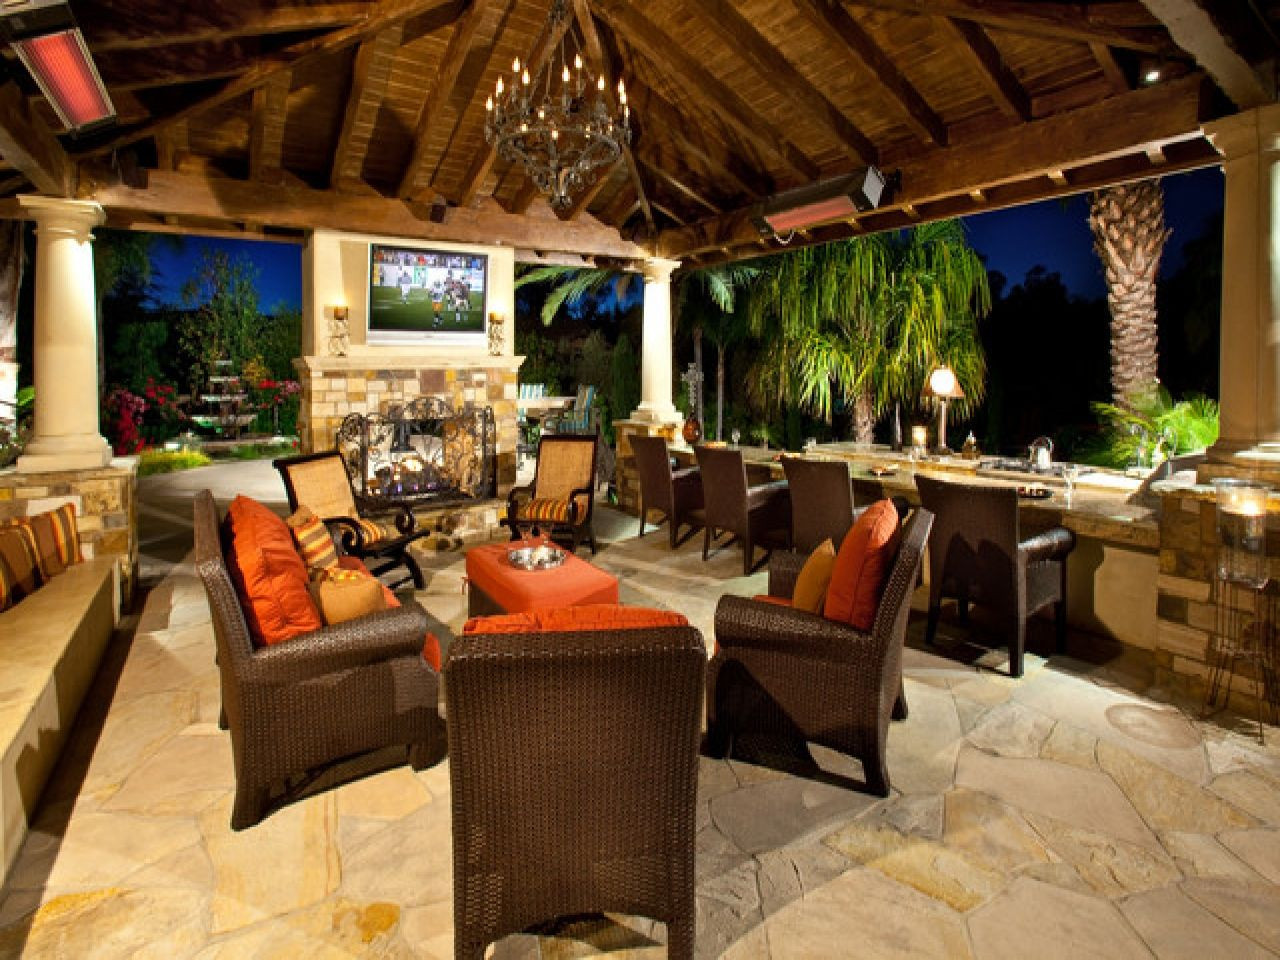 Covered Outdoor Kitchen Plans
 Luxury Outdoor Kitchens